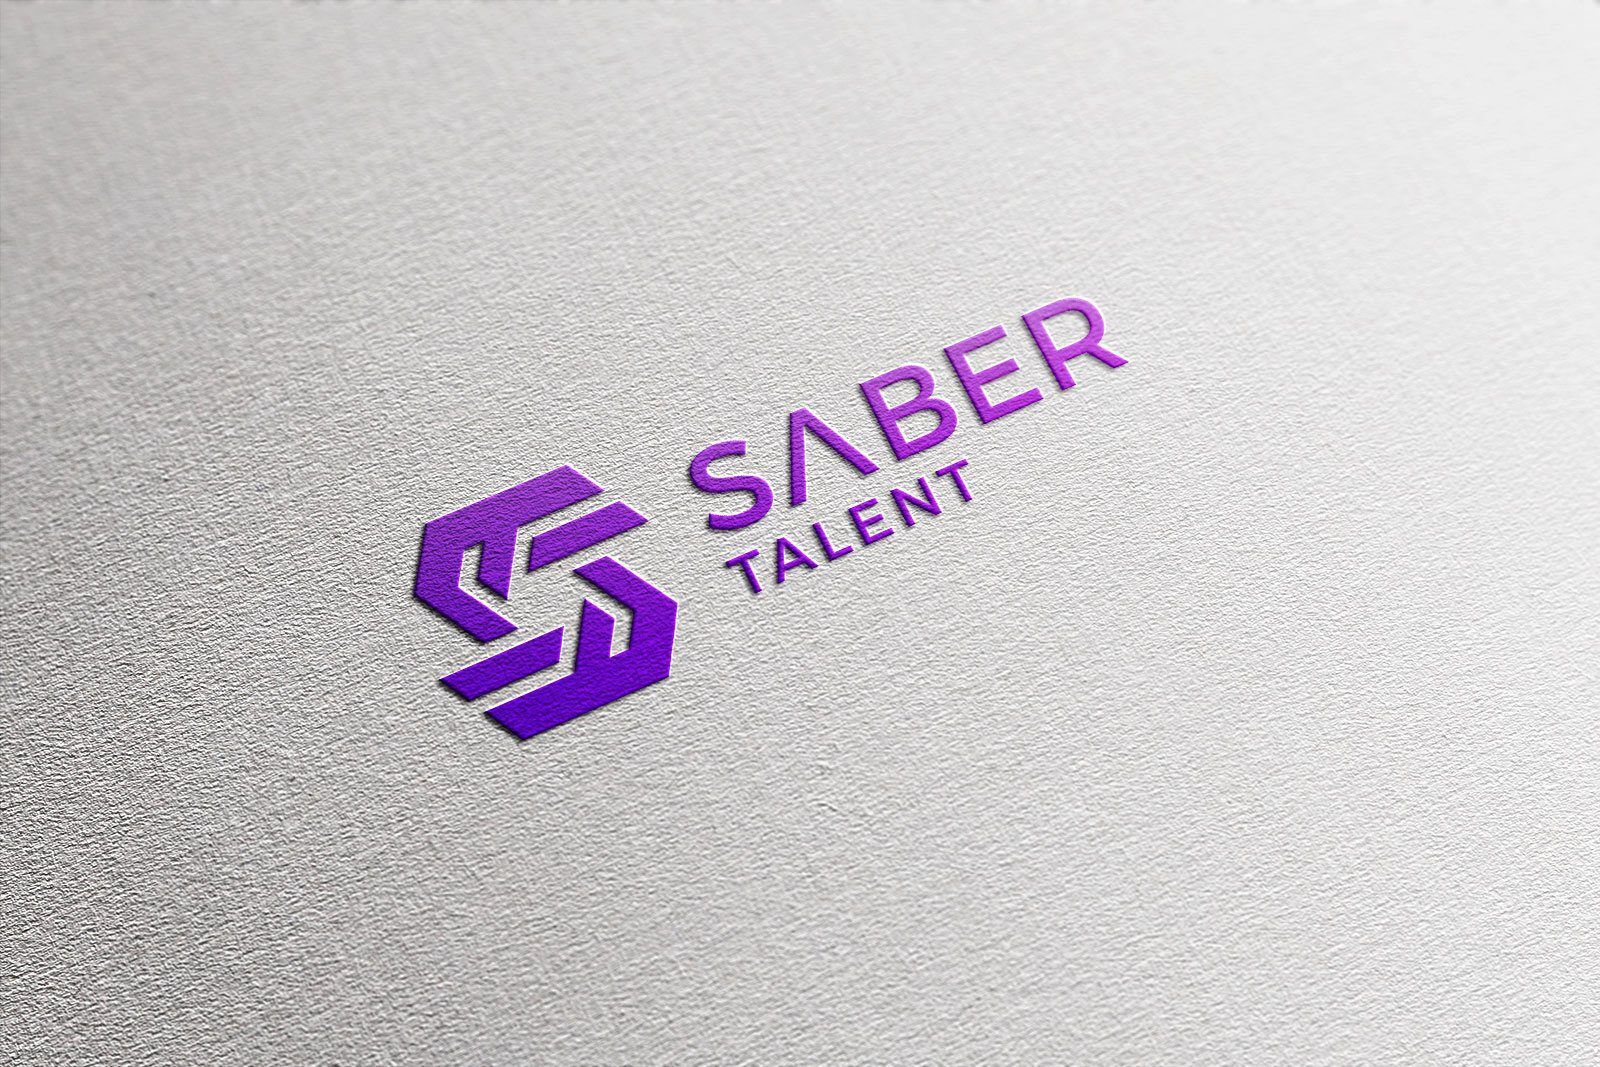 Saber Talent (Cyber Security)